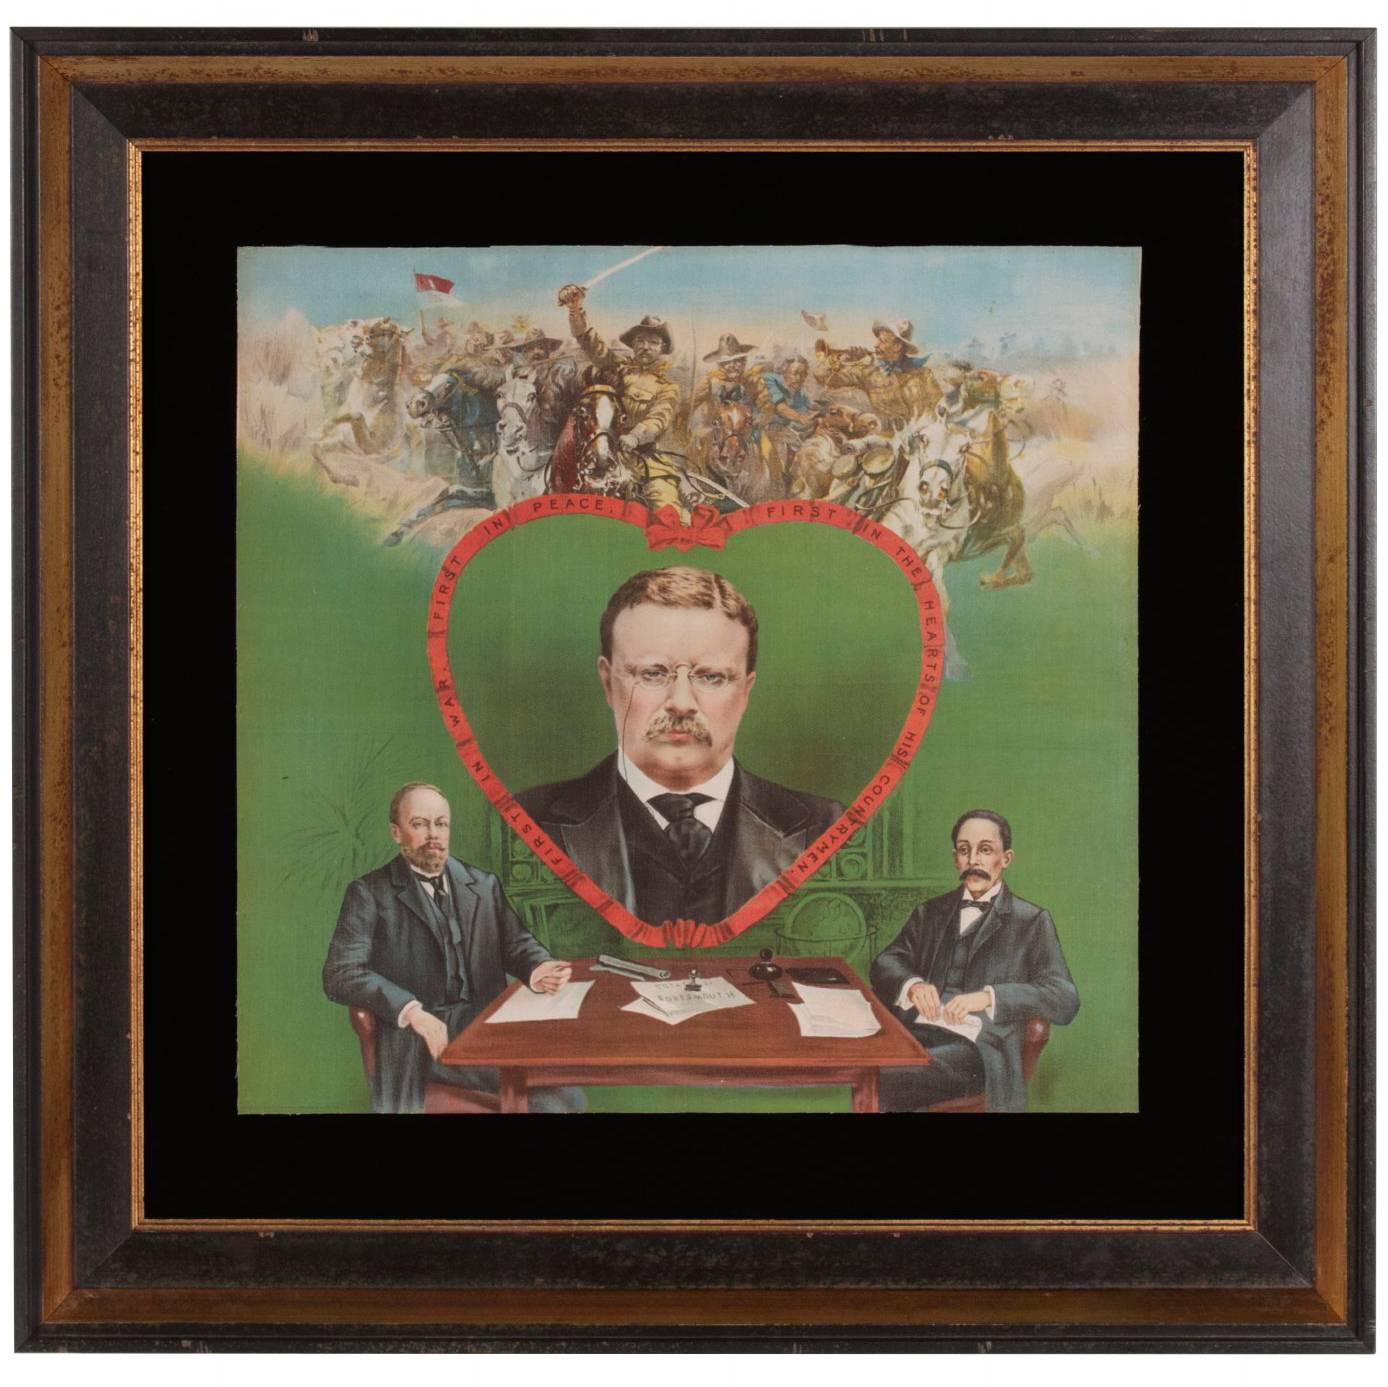 Graphic and Colorful Teddy Roosevelt Textile